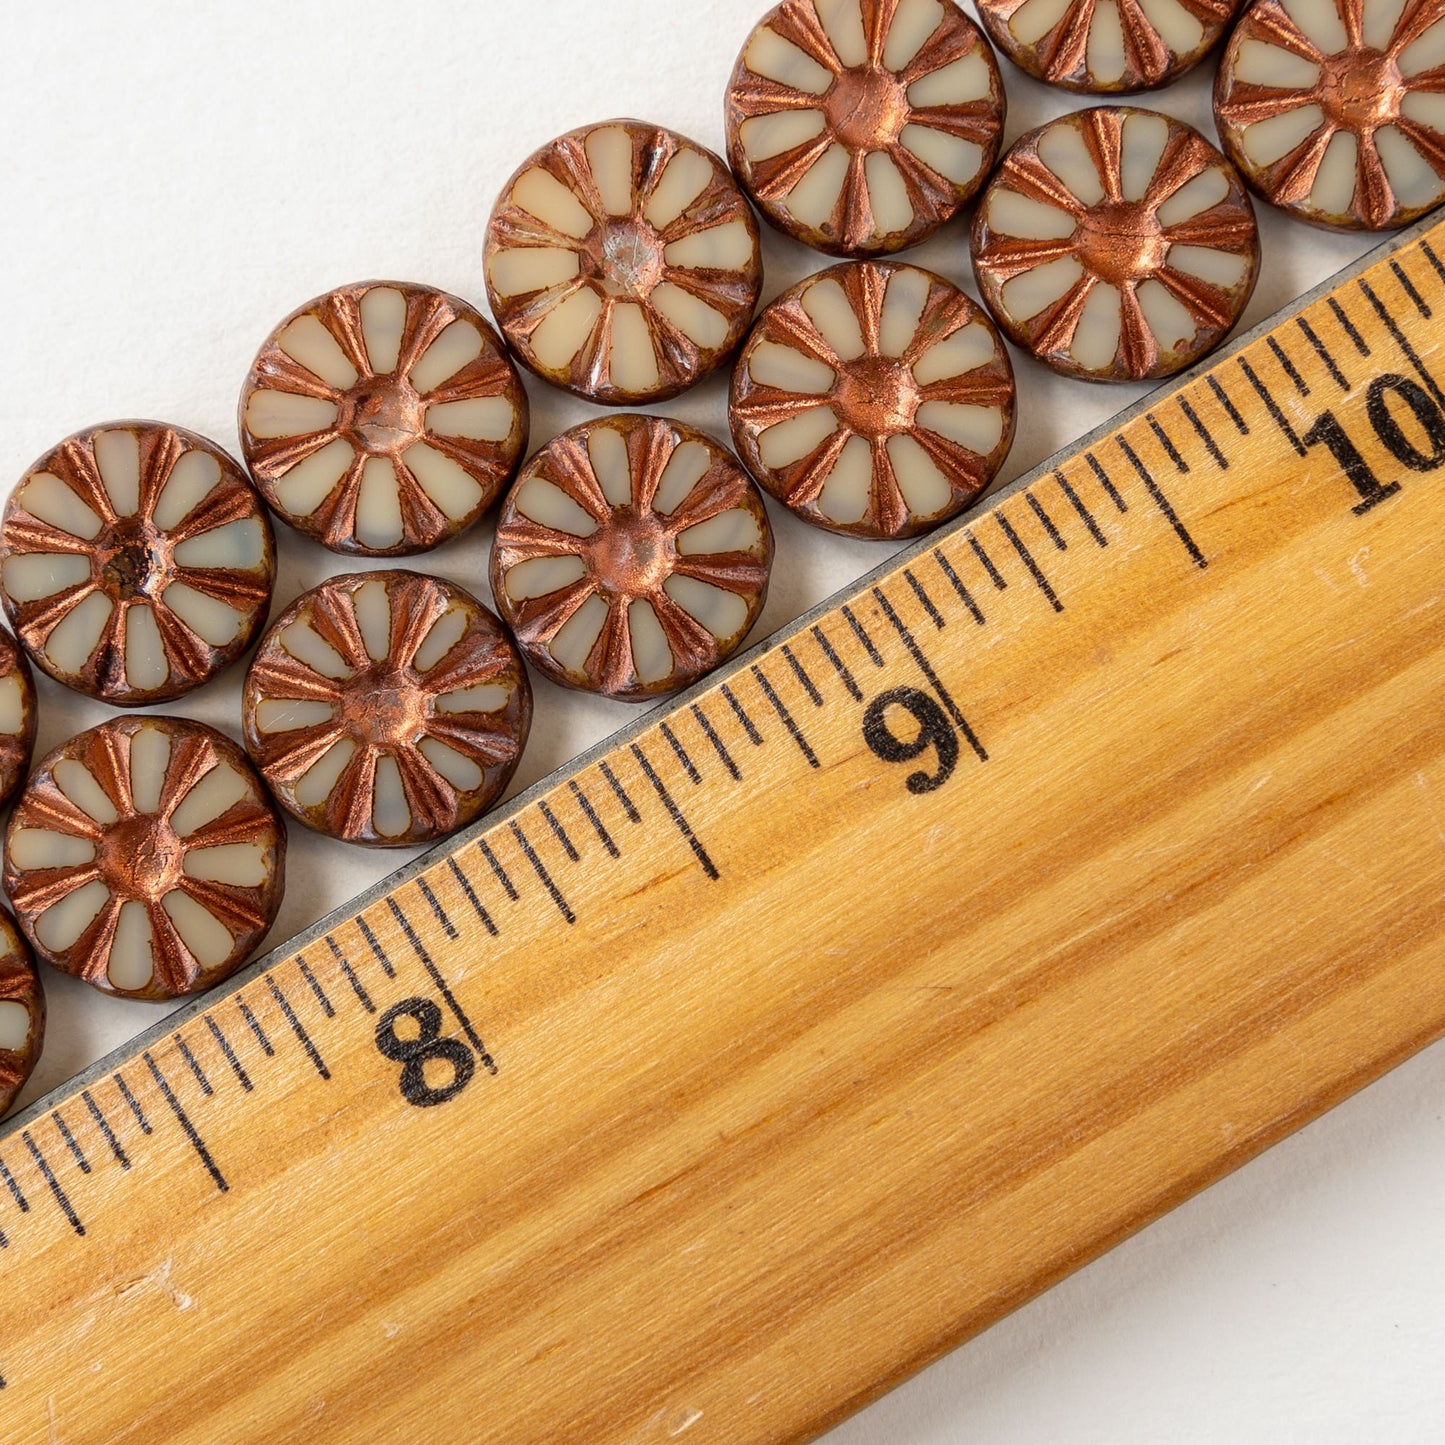 12mm sunflower Coin Beads - Ivory with Copper Wash - 10 or 30 Beads